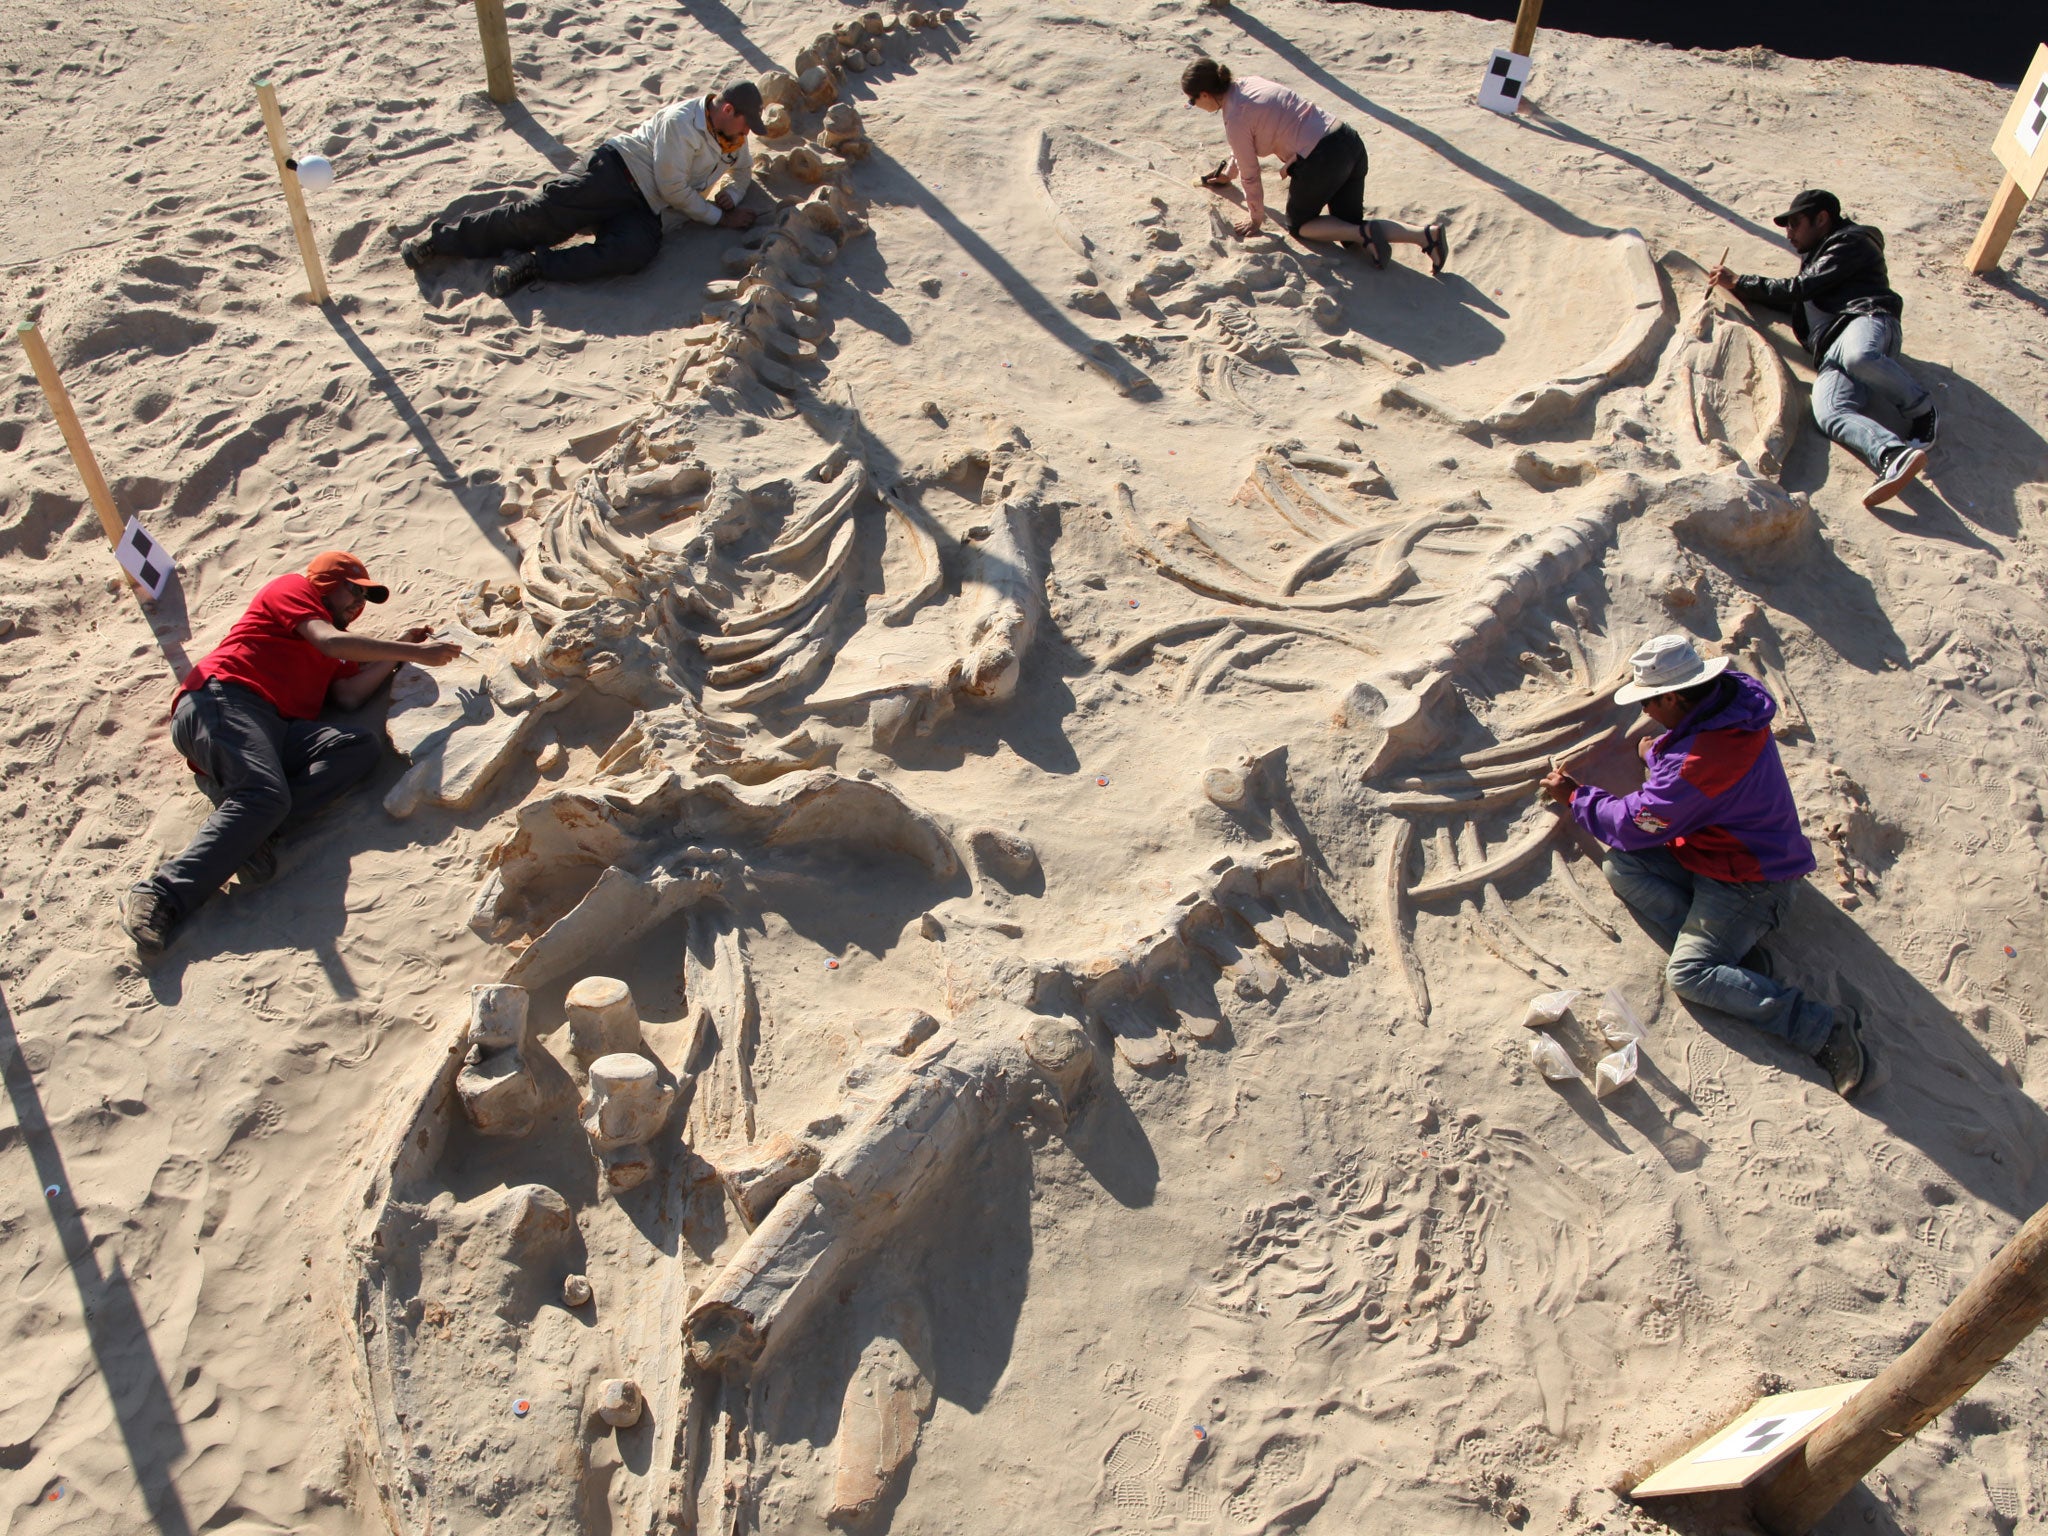 Chilean and Smithsonian paleontologists study several fossil whale skeletons at Cerro Ballena, next to the Pan-American Highway in the Atacama Region of Chile in 2011